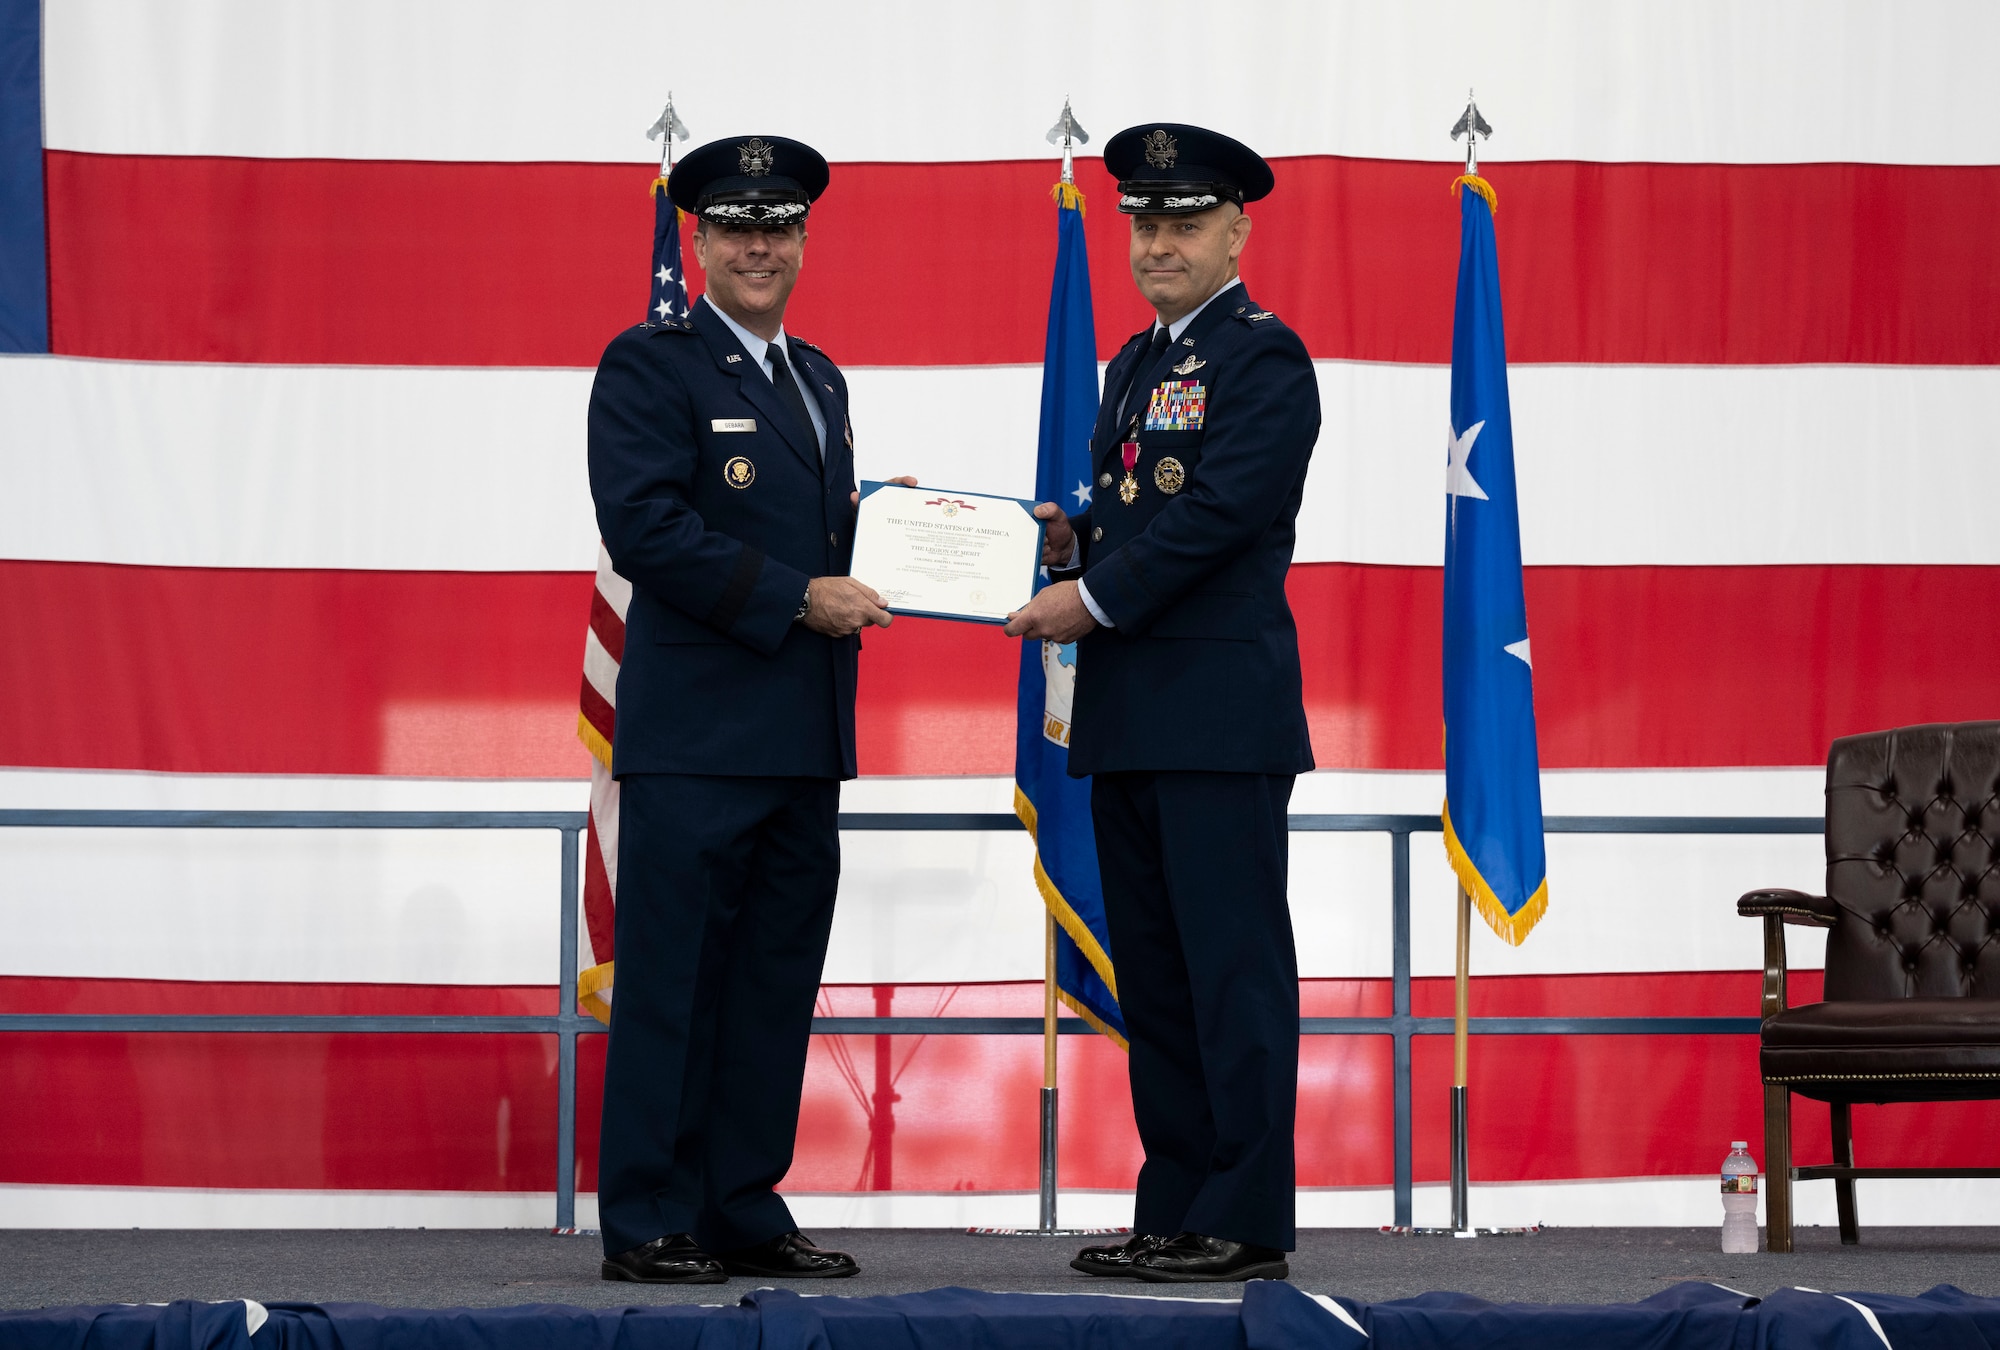 U.S. Air Force Maj. Gen. Andrew J. Gebara, Eighth Air Force and Joint-Global Strike Operations Center commander, left, awards Col. Joseph L. Sheffield, outgoing 28th Bomb Wing commander, the Meritorious Service Medal at Ellsworth Air Force Base, South Dakota, June 23, 2023.